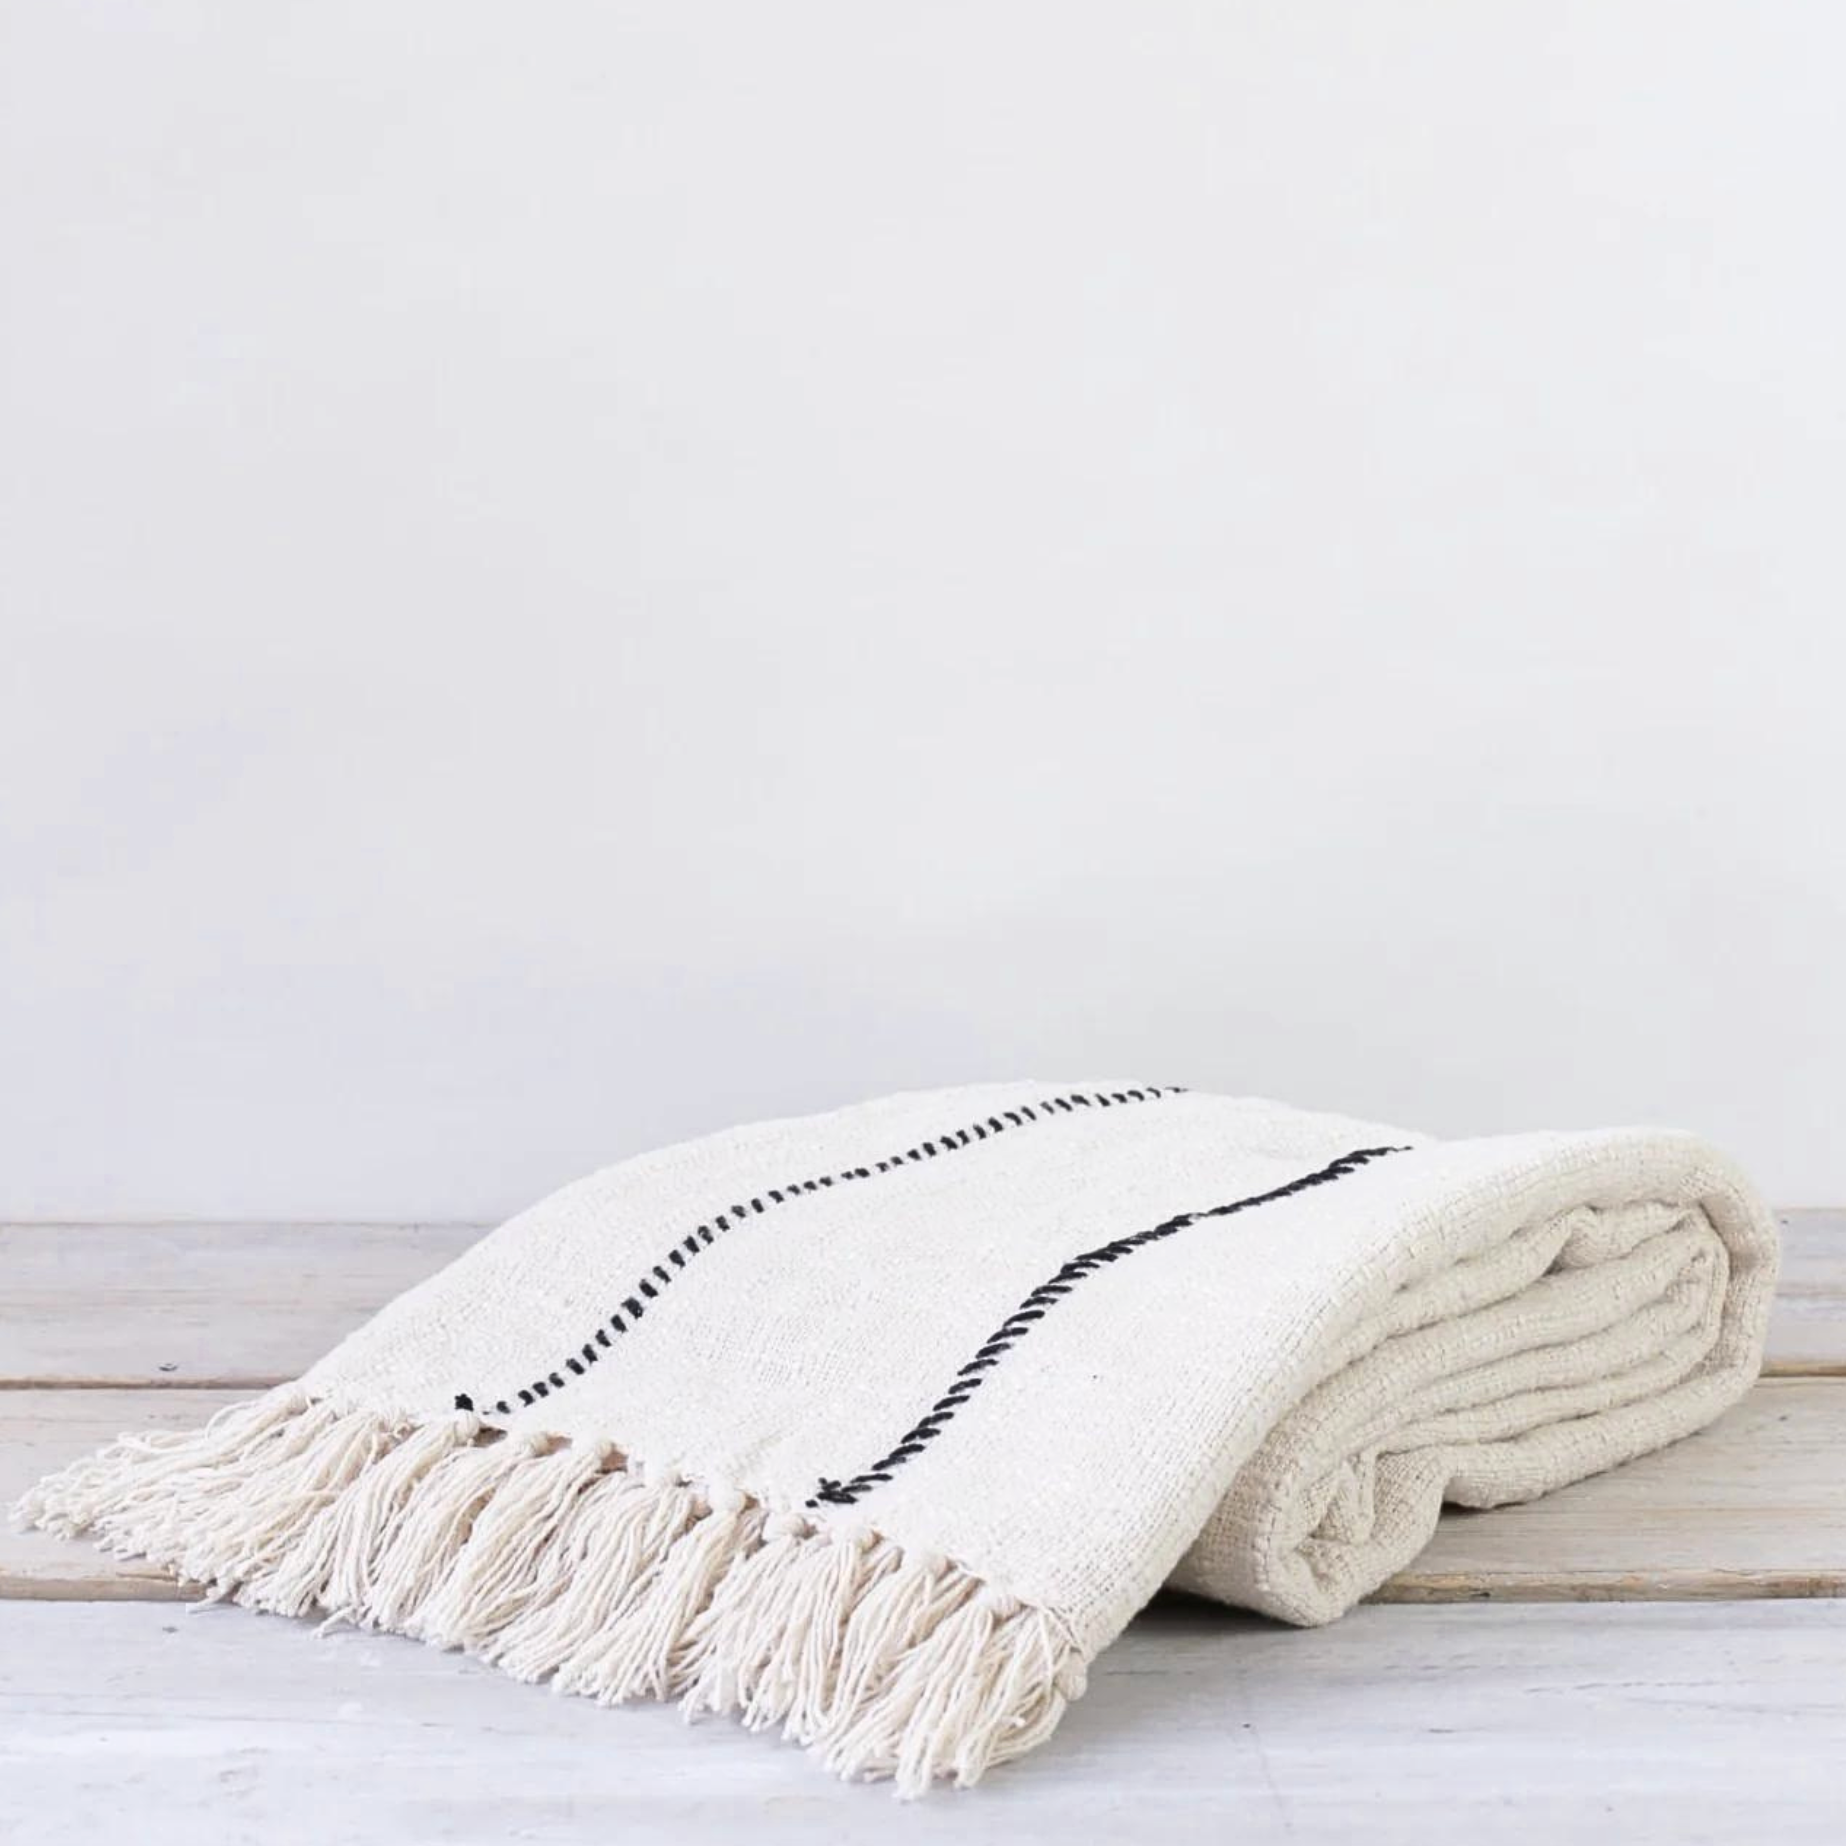 Folded neutral striped throw blanket with knotted tassels, folded on a rustic wooden table.